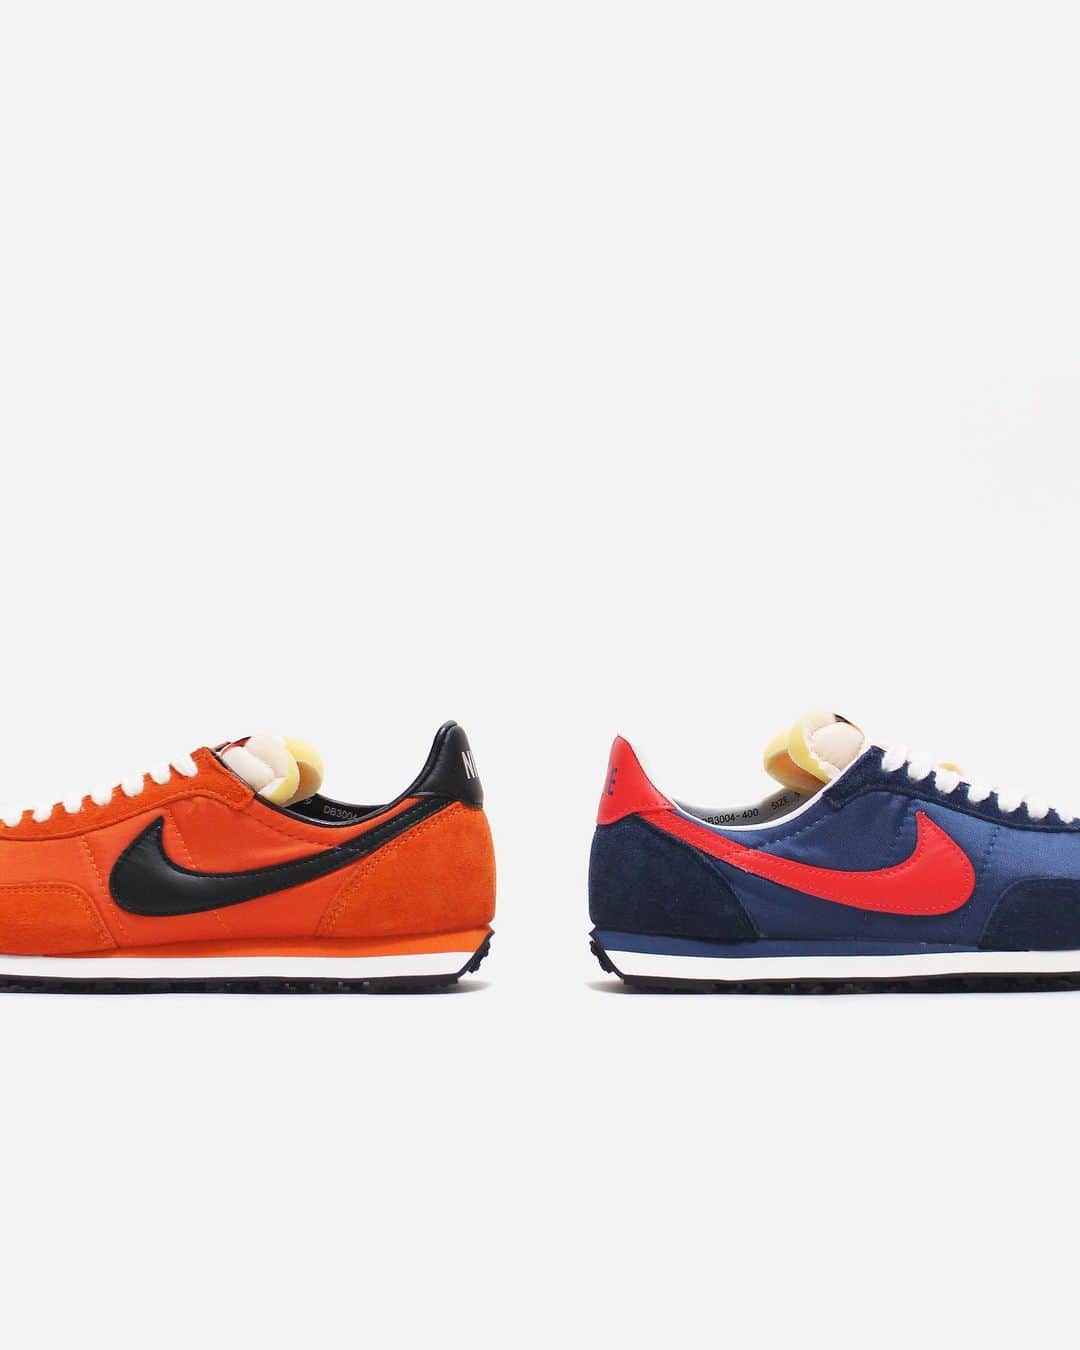 A+Sのインスタグラム：「2021. 2. 25 (thu) in store﻿ ﻿ ■NIKE WAFFLE TRAINER 2 SP﻿ COLOR : MIDNIGHT NAVY/MAX ORANGE-MYSTIC NAVY , STARFISH/BLACK-STARFISH-SUMMIT WHITE﻿ SIZE : 26.0cm-29.0cm﻿ PRICE : ¥12,100 (tax incl.) ﻿ モカシンをイメージしたアッパーとワッフルアウトソールが、1977年のオリジナルを彷彿とさせるワッフル トレーナー 2。ウエッジミッドソールで伝説のシルエットを強化しつつ、形状記憶フォームのソックライナーや密度の異なる2種類のフォームミッドソールを採用して、最新のアップデートを施した。世界レベルの職人技を駆使したナイロンとスエードの組み合わせに、クラシックなアウトソールがあらゆる路面で耐久性に優れたトラクションを発揮する。このエディションでは、ベースカラーのミッドナイトネイビーに、マックスオレンジがエネルギッシュなアクセントを添える。﻿ ﻿ A waffle trainer 2 with a moccasin-inspired upper and waffle outsole that is reminiscent of the 1977 original. While enhancing the legendary silhouette with the wedge midsole, we have adopted the sockliner of shape memory foam and two types of foam midsole with different densities, and made the latest update. A combination of world-class craftsmanship in nylon and suede, the classic outsole provides durable traction on all surfaces. In this edition, Max Orange adds an energetic accent to the base color Midnight Navy.﻿ ﻿ #a_and_s﻿ #NIKE﻿ #NIKEWAFFLETRAINER﻿ #NIKEWAFFLETRAINER2SP」